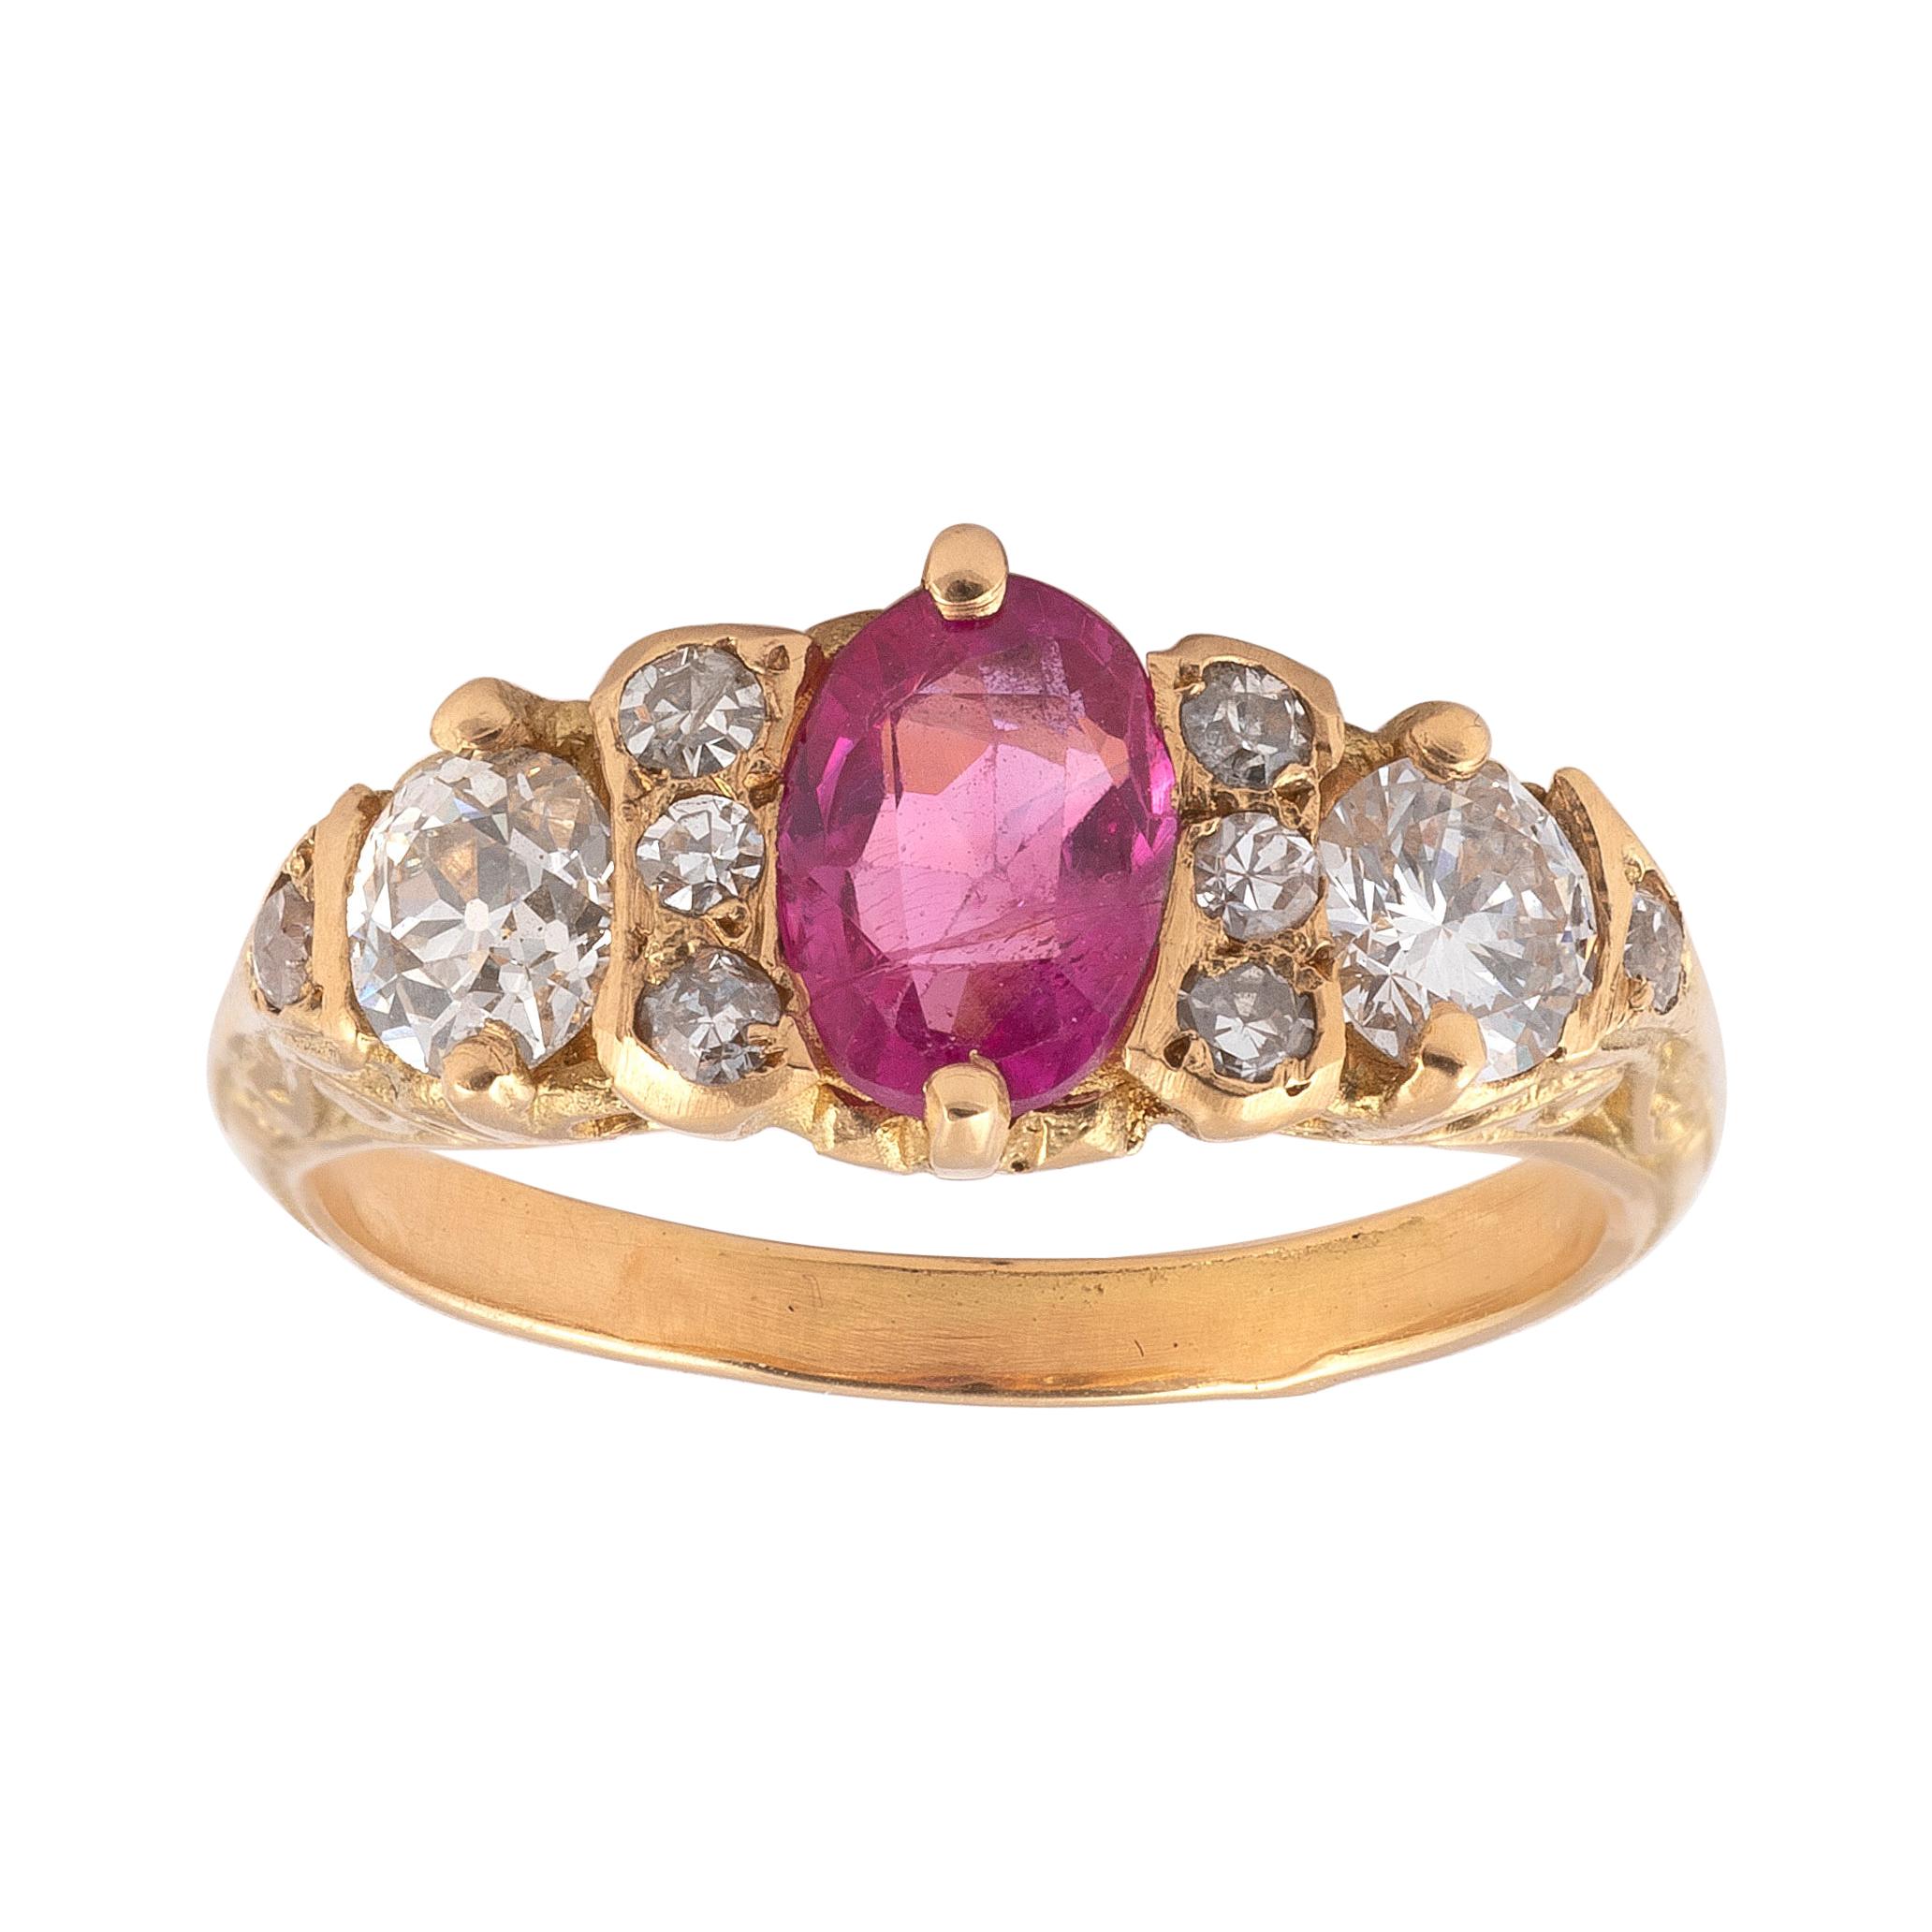 Victorian 18kt Yellow Gold Diamond and Pink Sapphire Band Ring